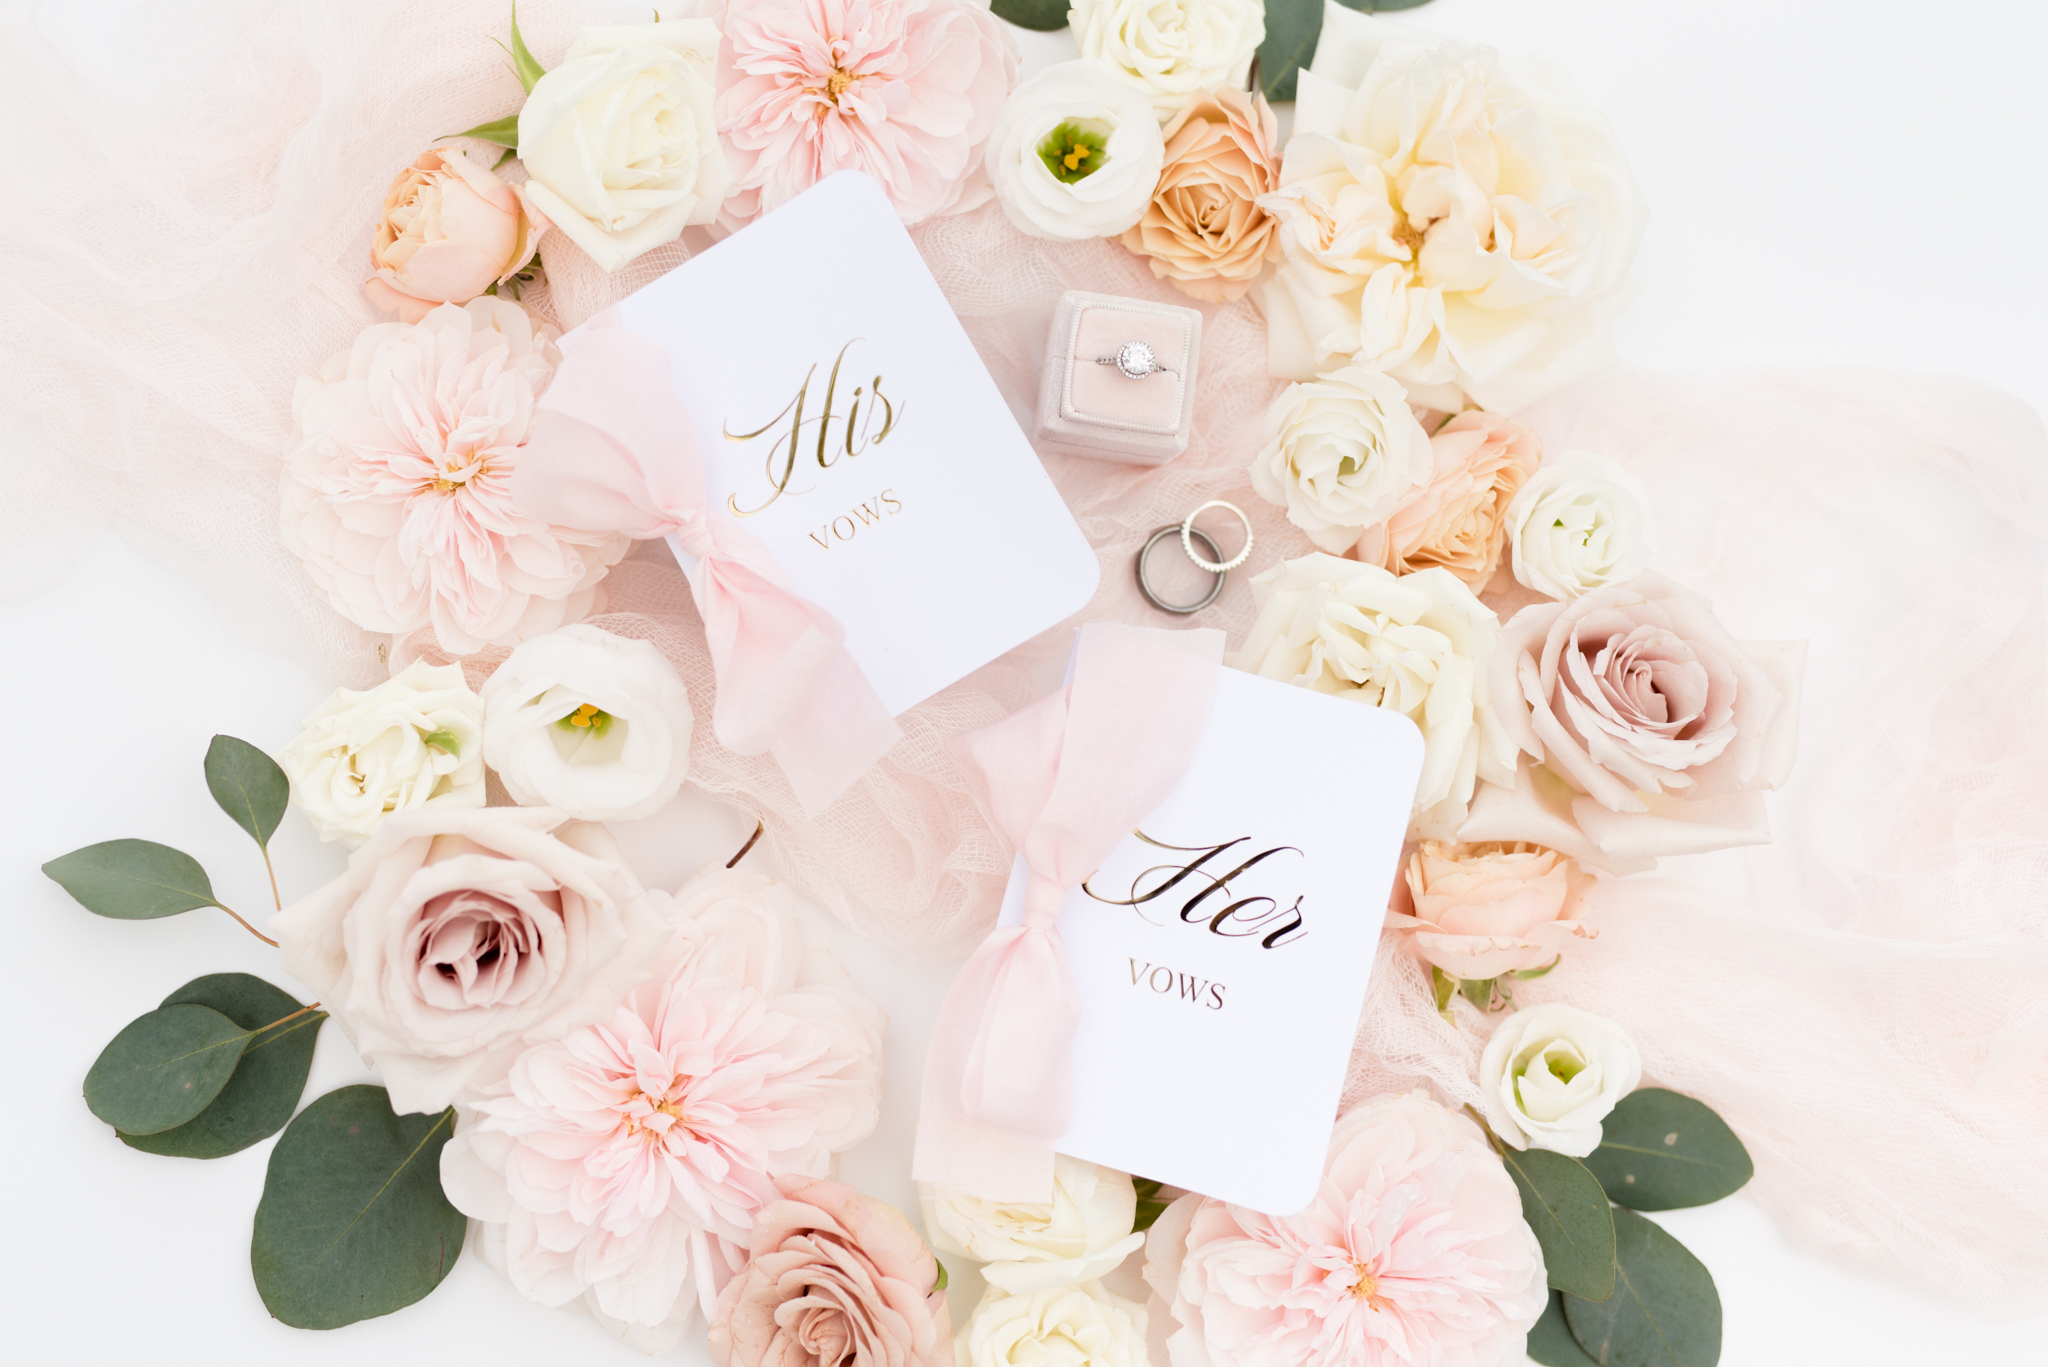 His and hers vow books sit with pink flowers.